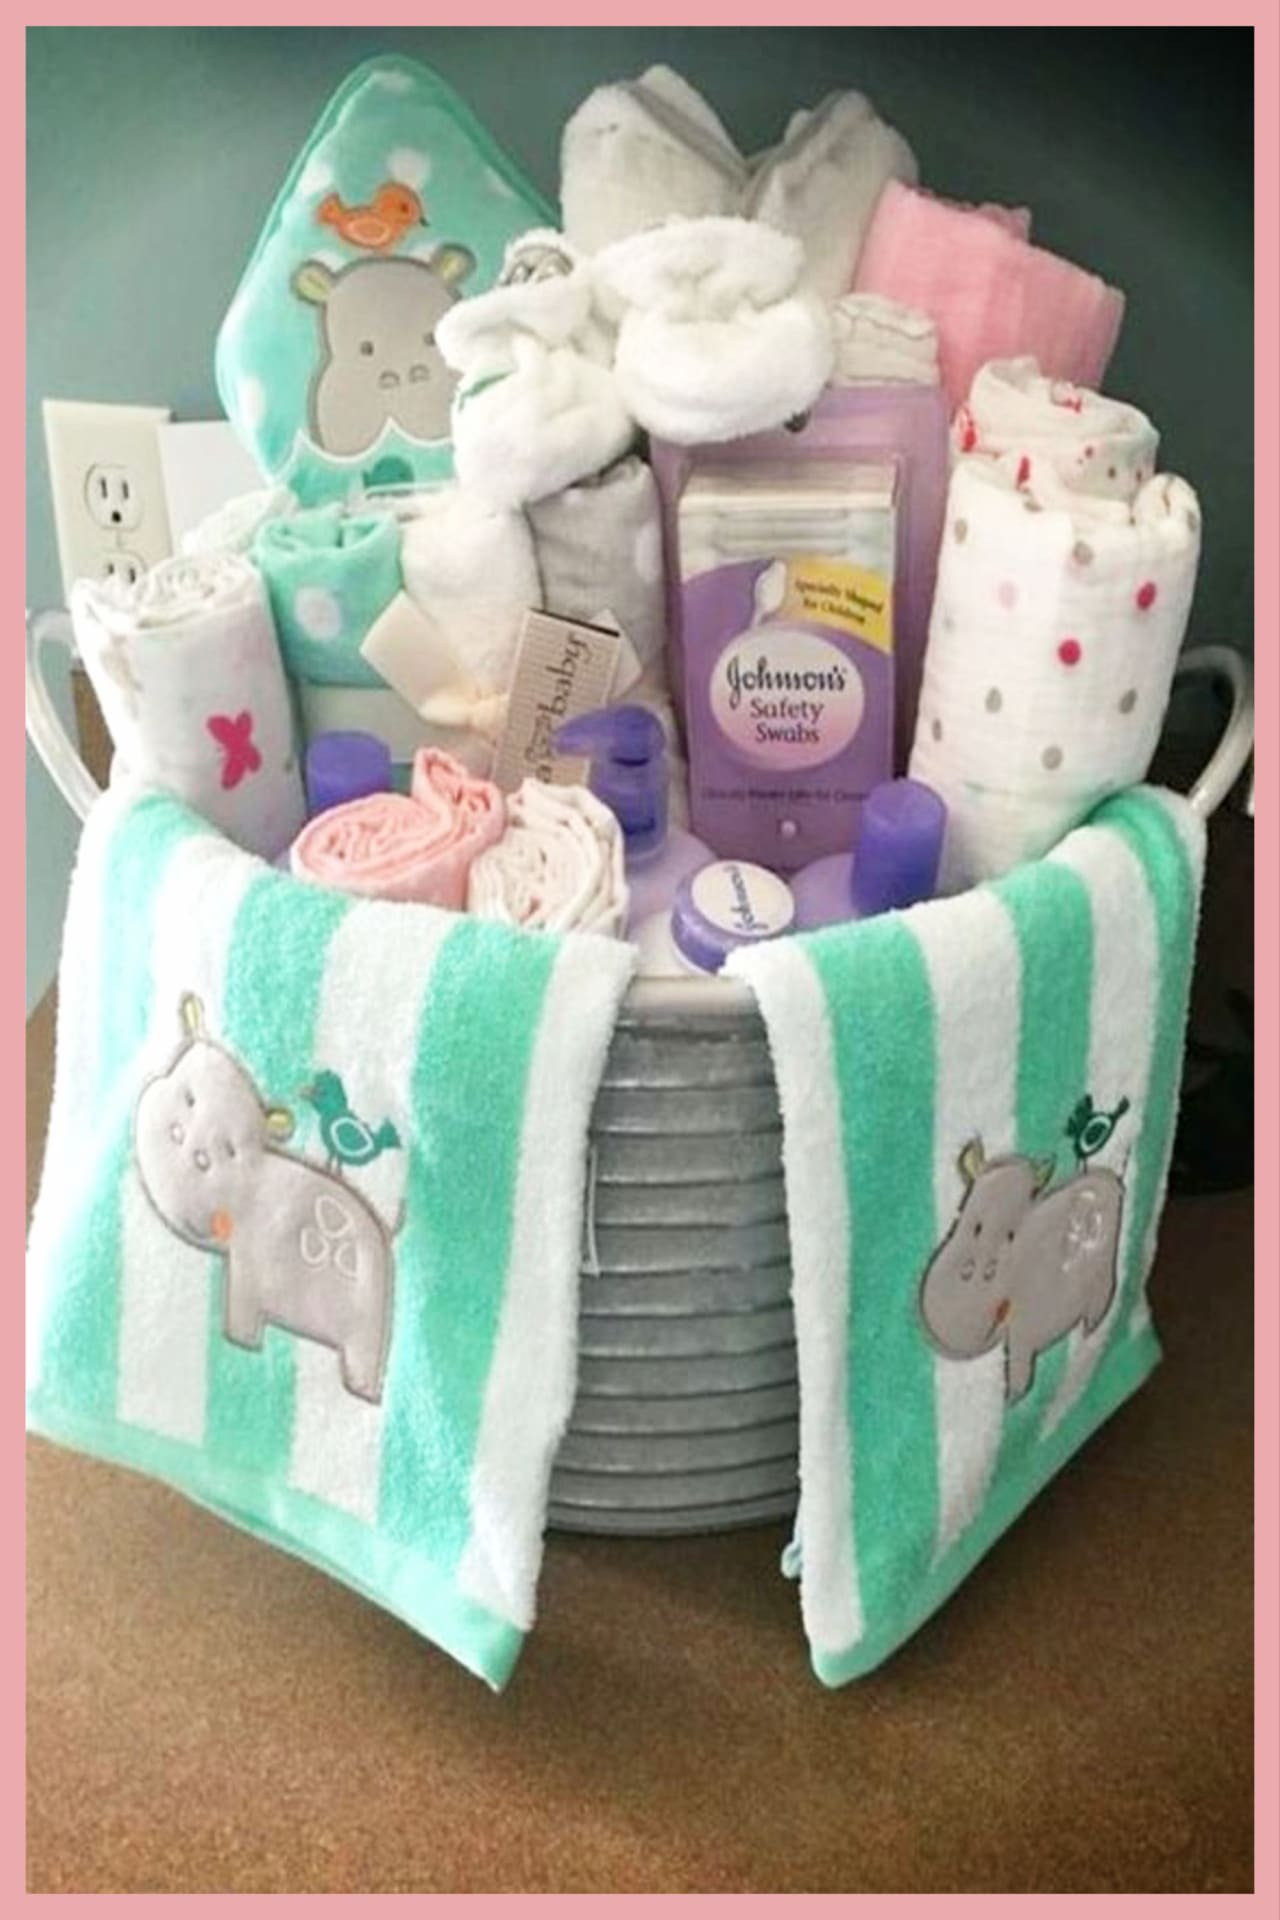 Shower Gift Basket Ideas
 28 Affordable & Cheap Baby Shower Gift Ideas For Those on